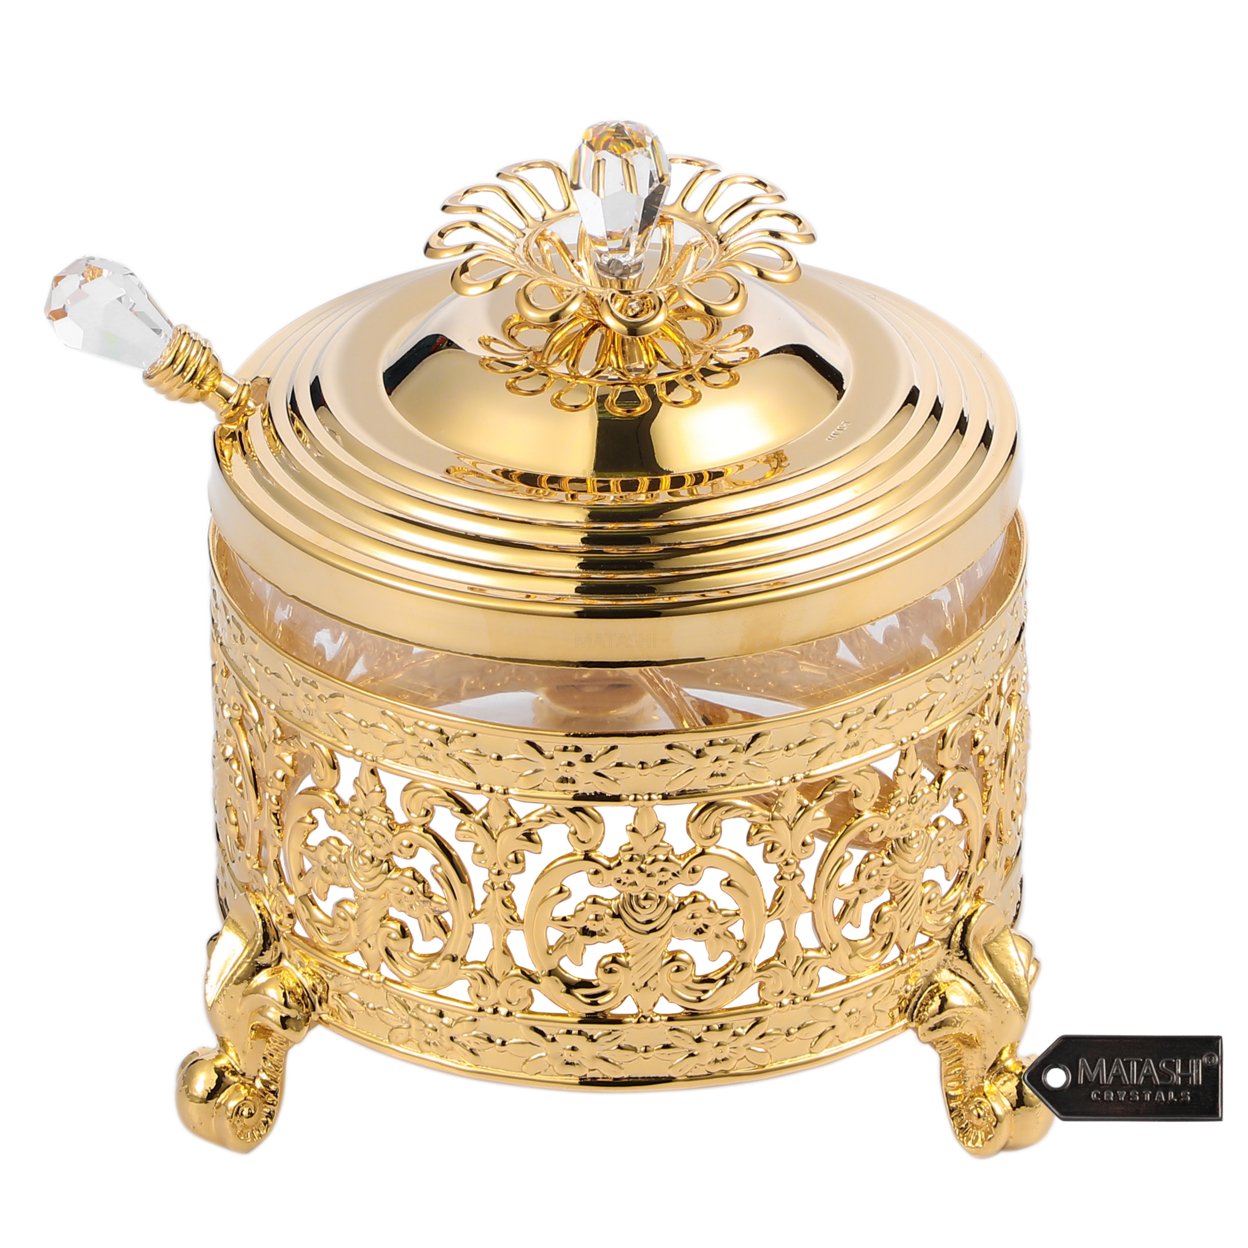 Matashi 24K Gold/SIlver Plated Sugar Bowl, Honey Dish, Glass Bowl - Detailed Intricate Design And Flower On Cover With Crystal Studded Spoon